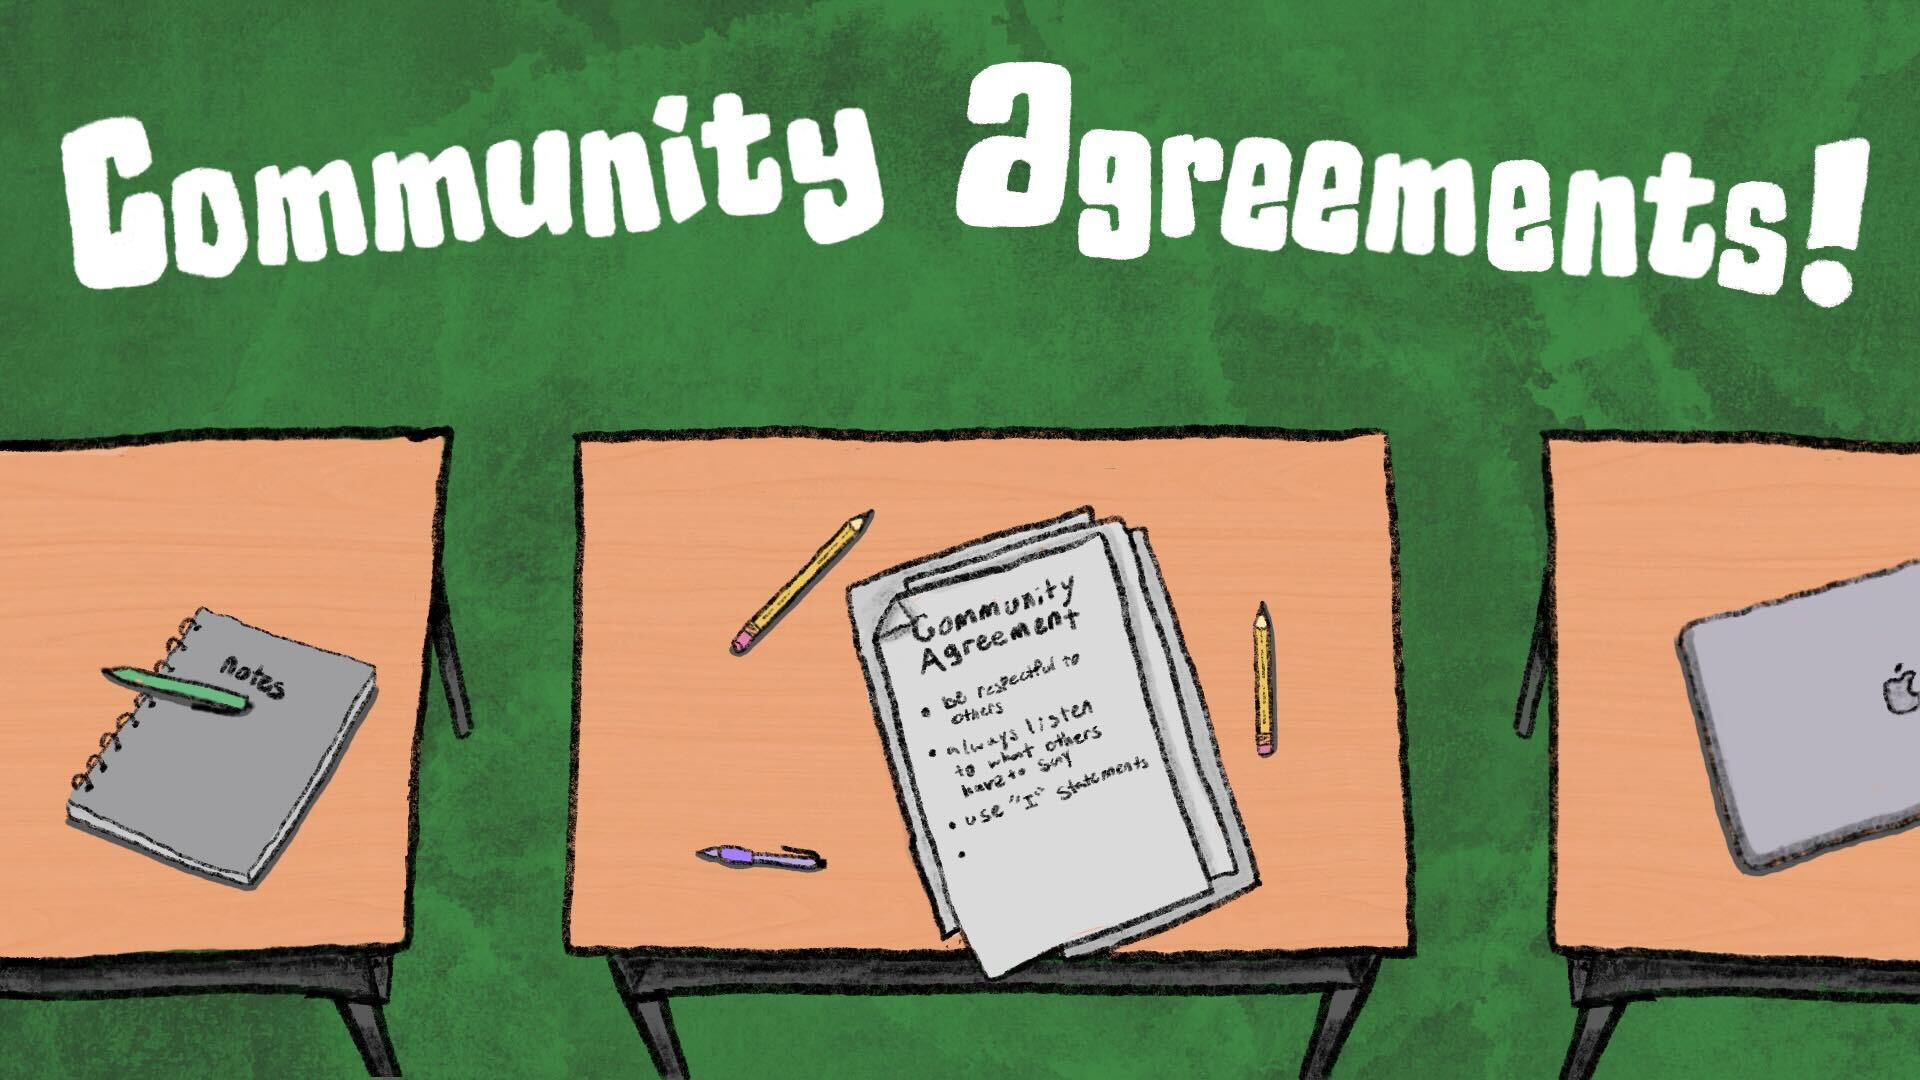 An illustration with three desks and a textured green background. On the center desk are papers comprising a community agreement and the words “community agreements!” are above the desks. Illustration by Leo Preston.